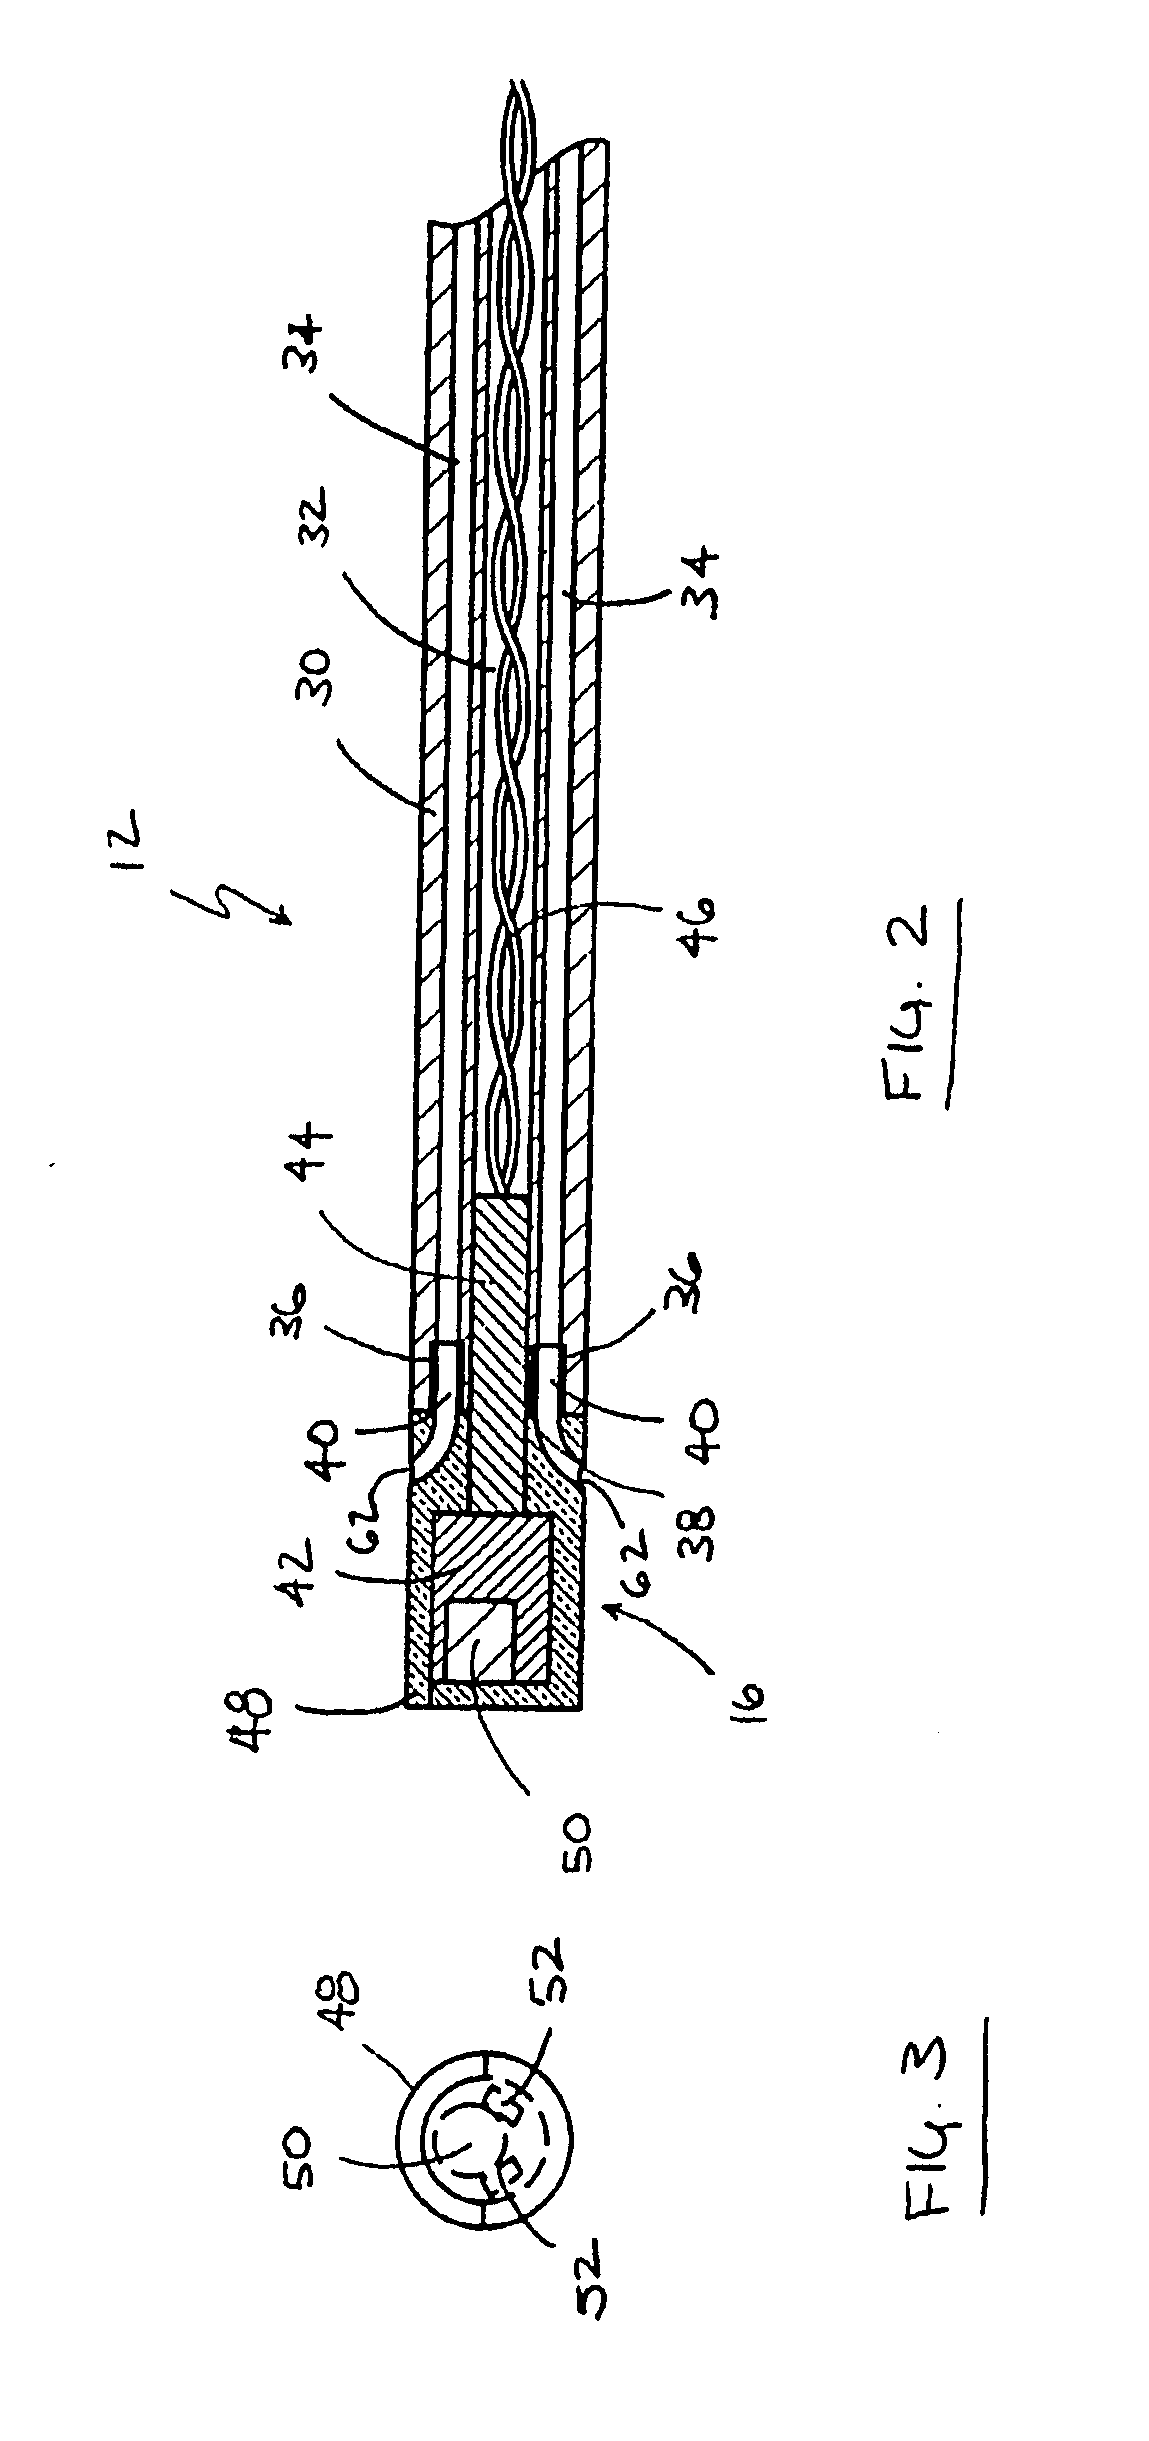 Optical surgical device and methods of use